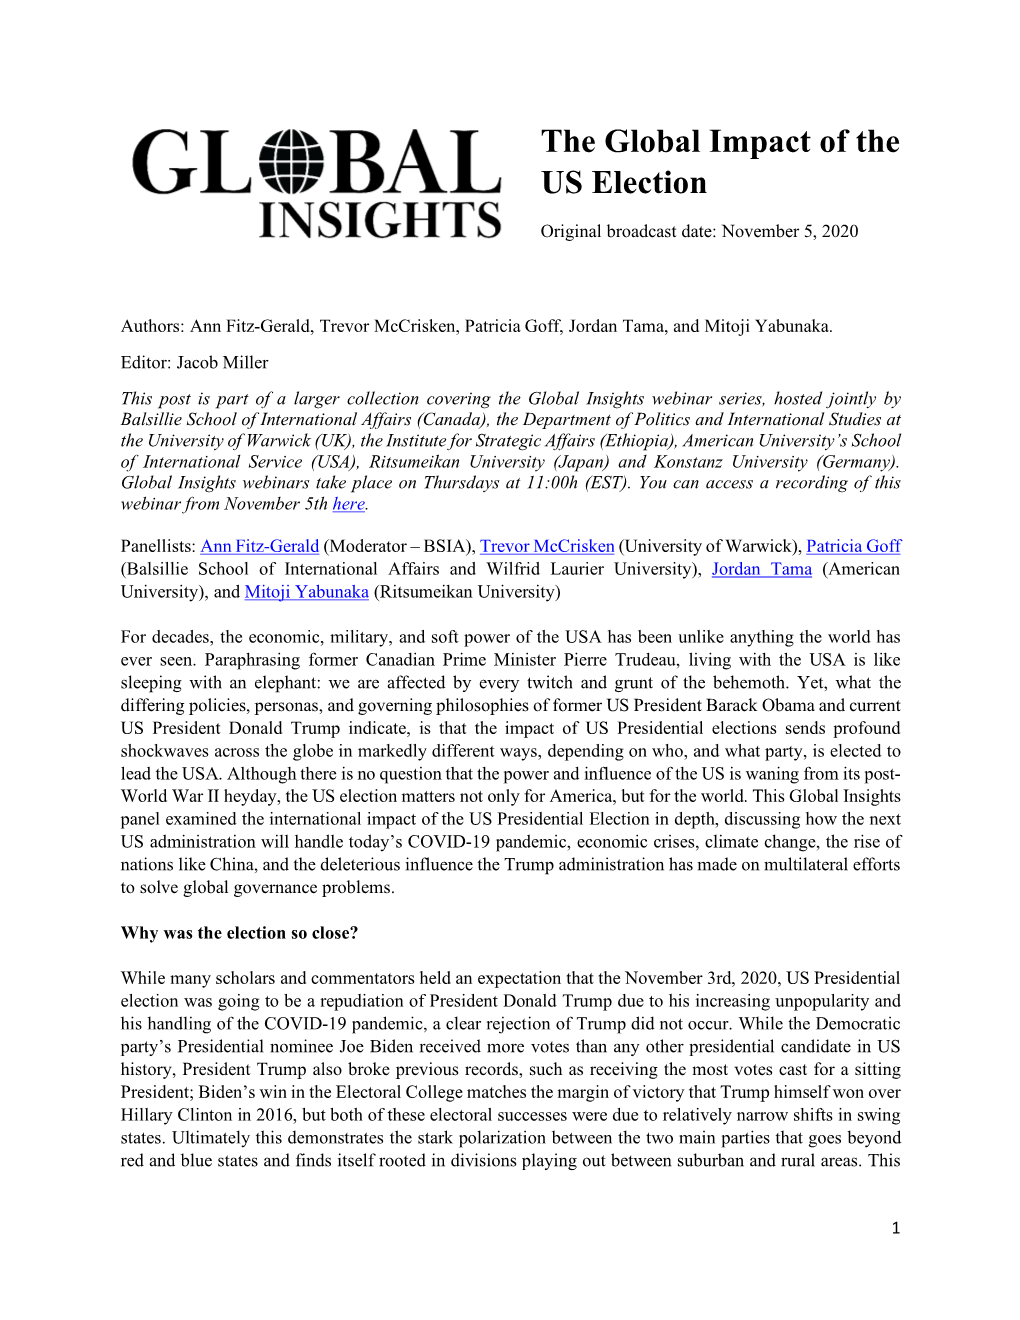 The Global Impact of the US Election